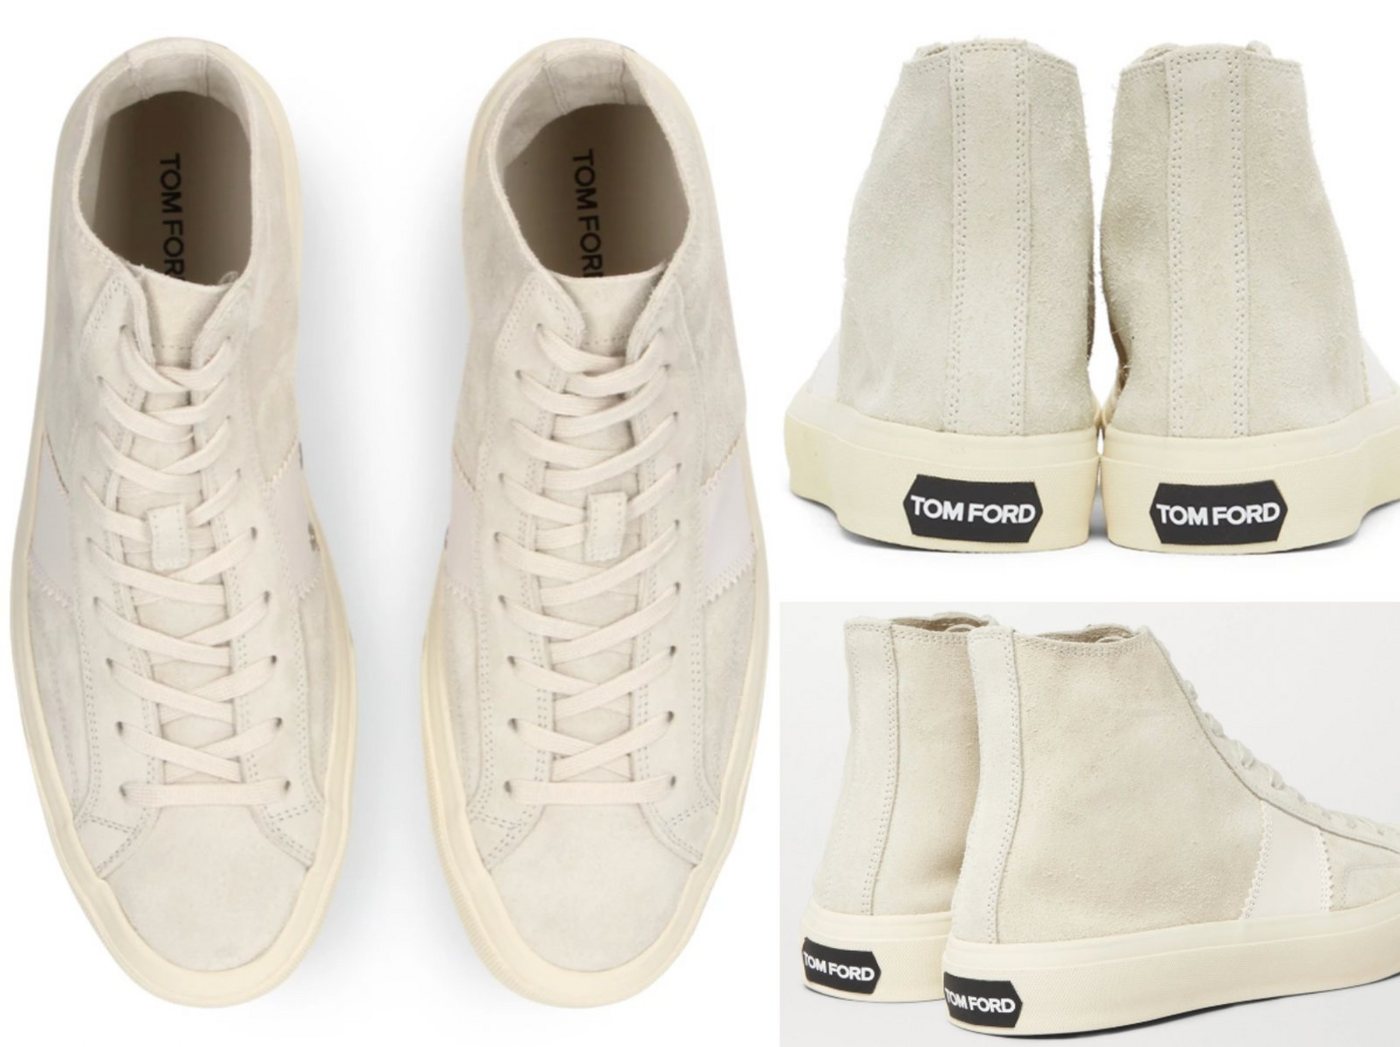 Tom Ford TOM FORD Cambridge Catwalk High-top Suede Sneakers Taupe Schuhe Traine Sneaker von Tom Ford